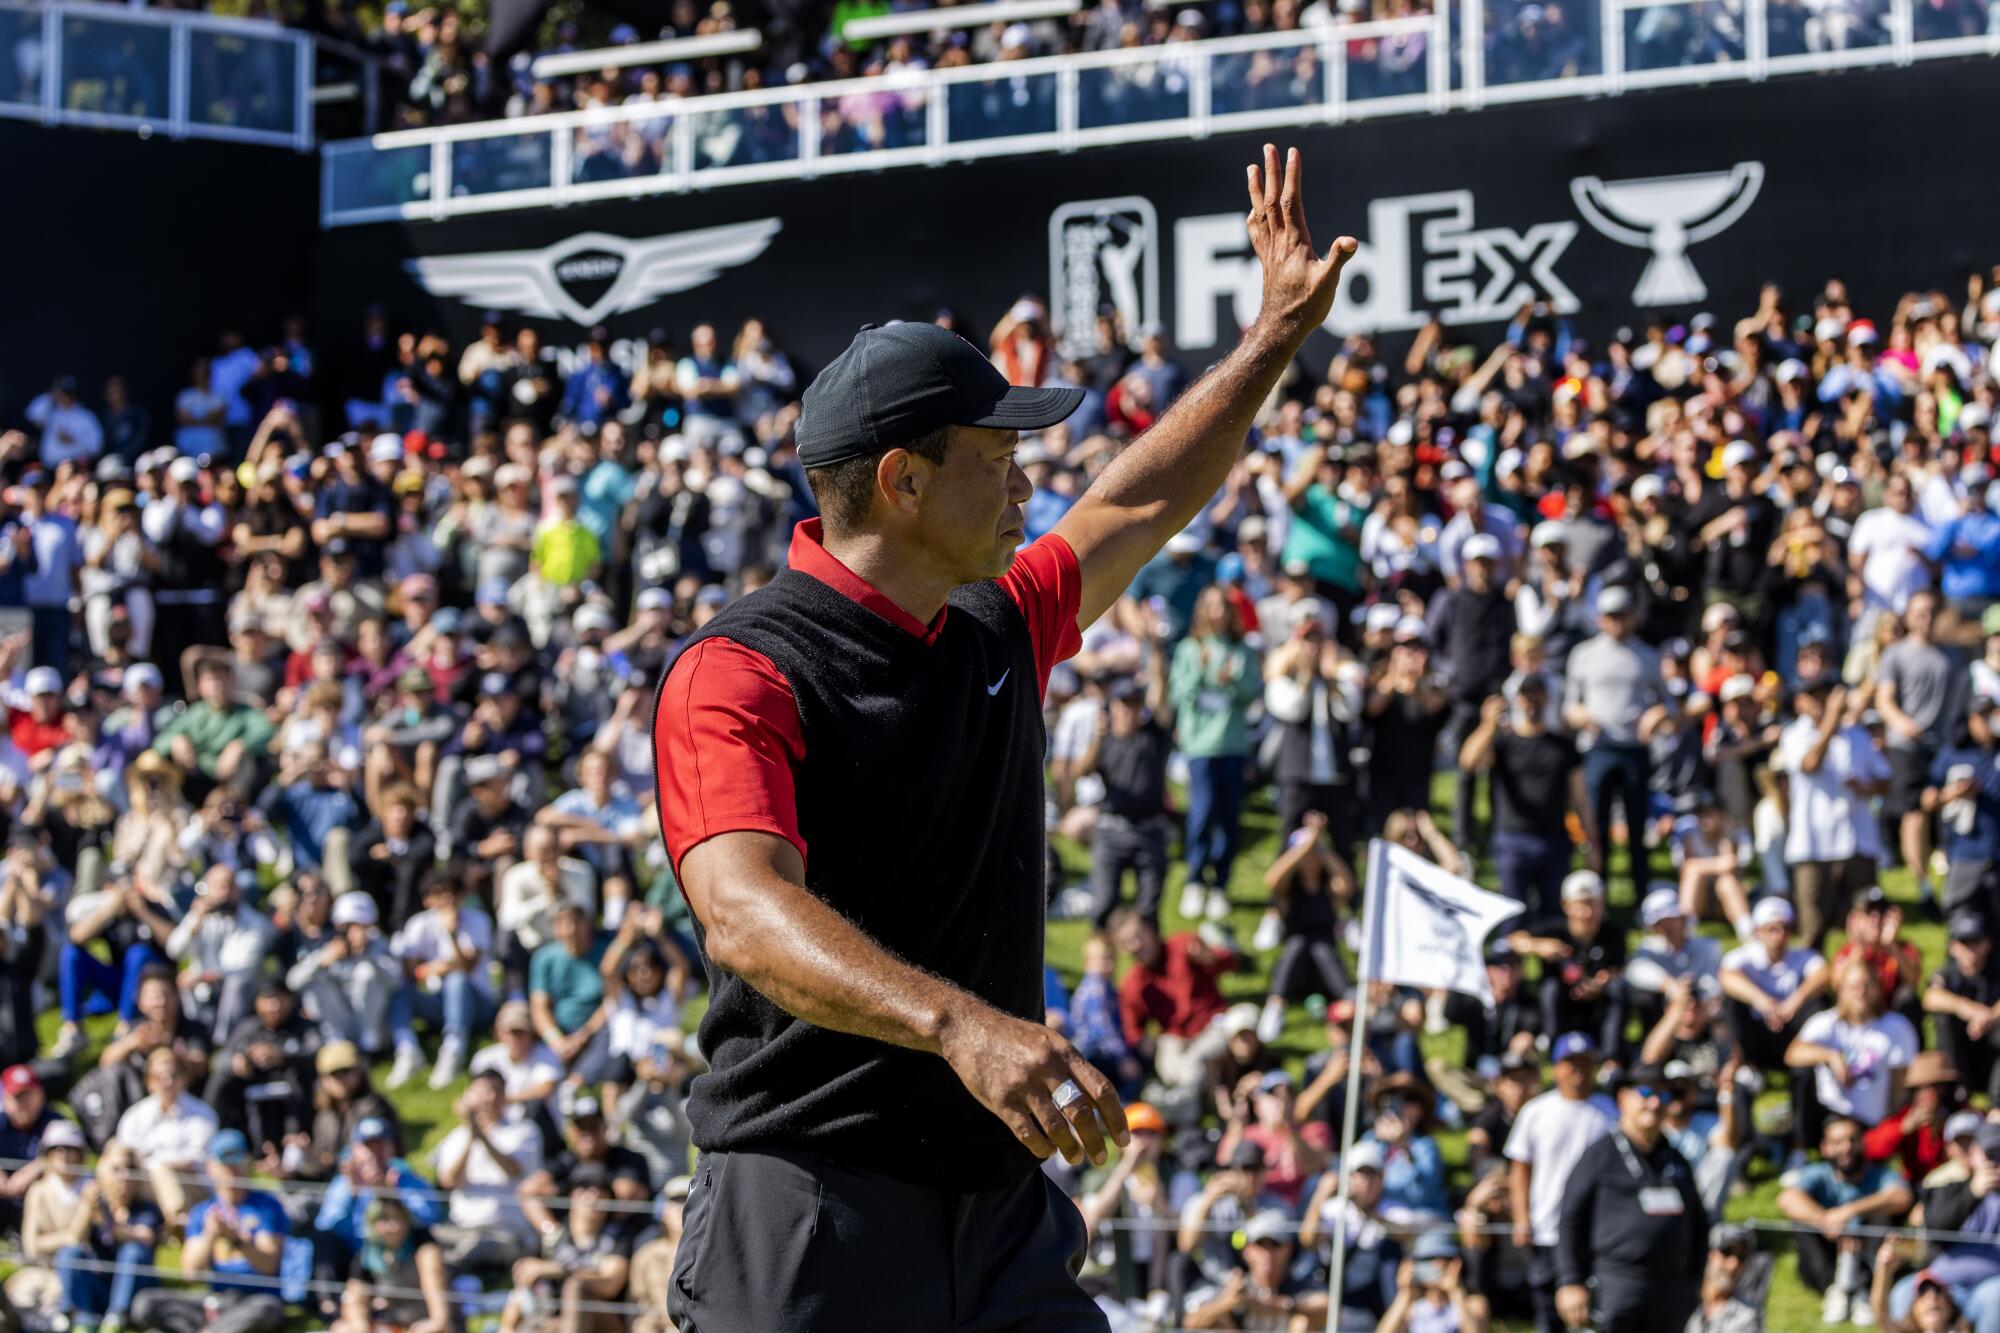 Tiger Woods waves goodbye to the crowd after finishing his final round at Riviera Country Club on Sunday.